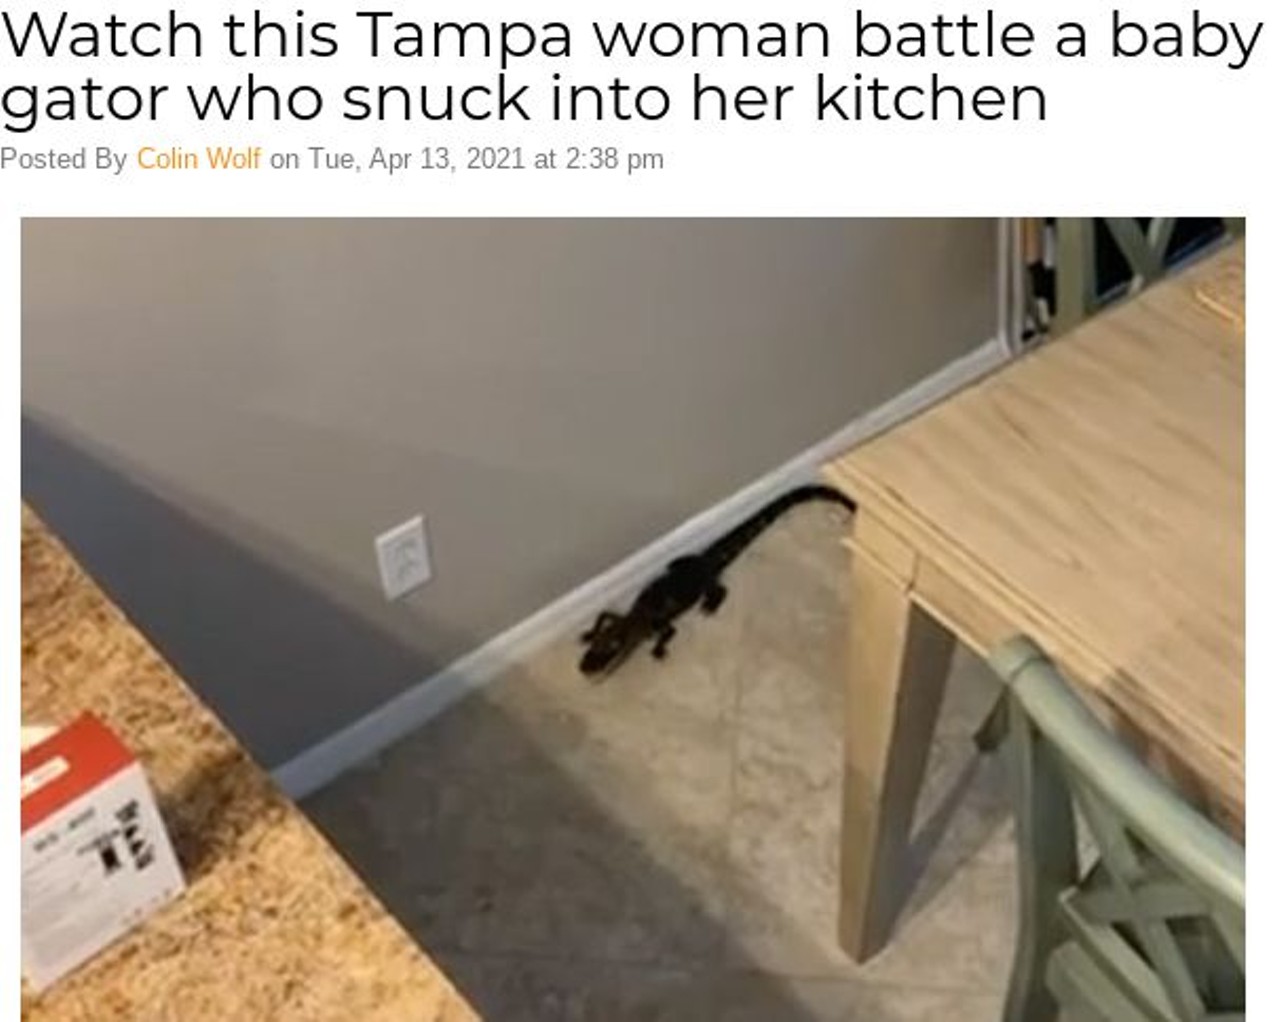 Watch this Tampa woman battle a baby gator who snuck into her kitchen
